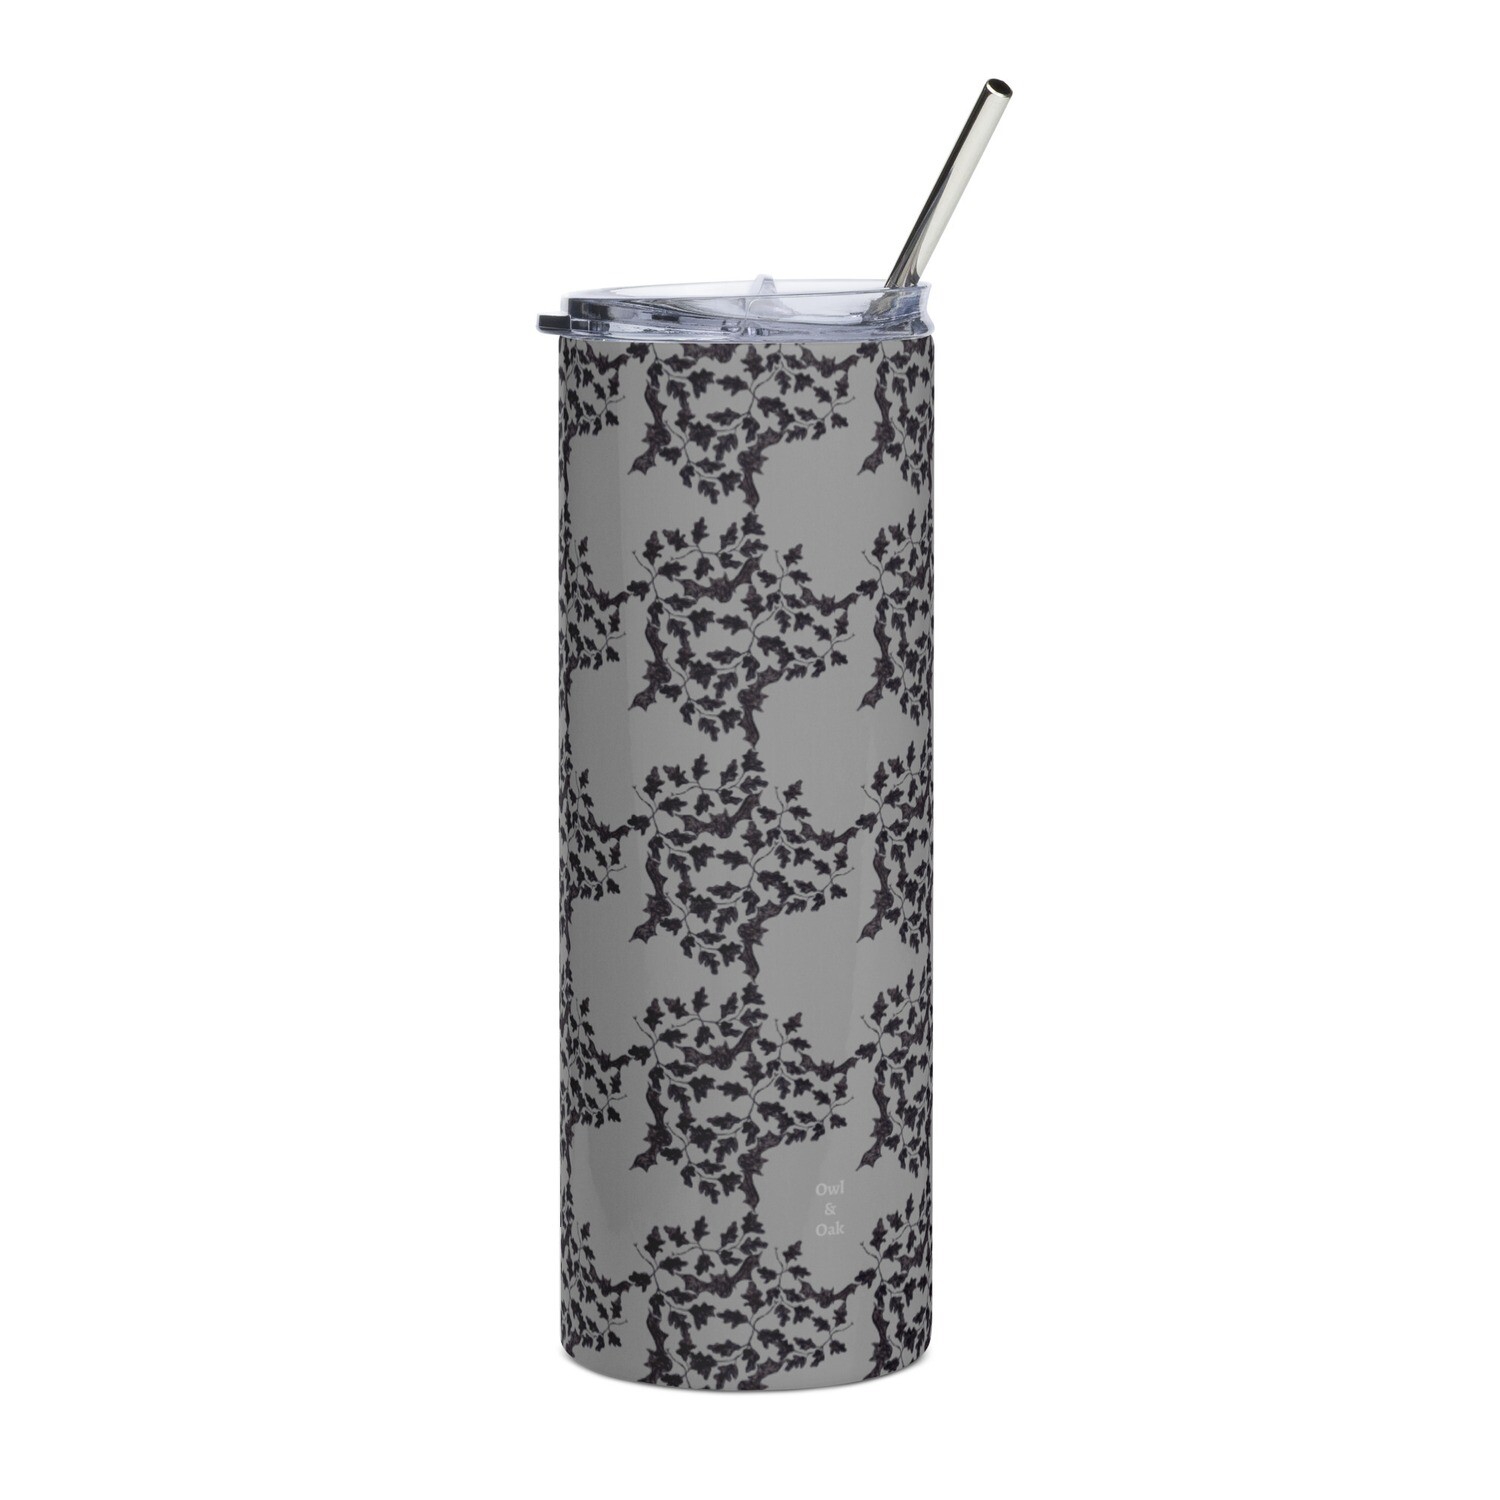 Eerie Bats and Branches Stainless steel tumbler